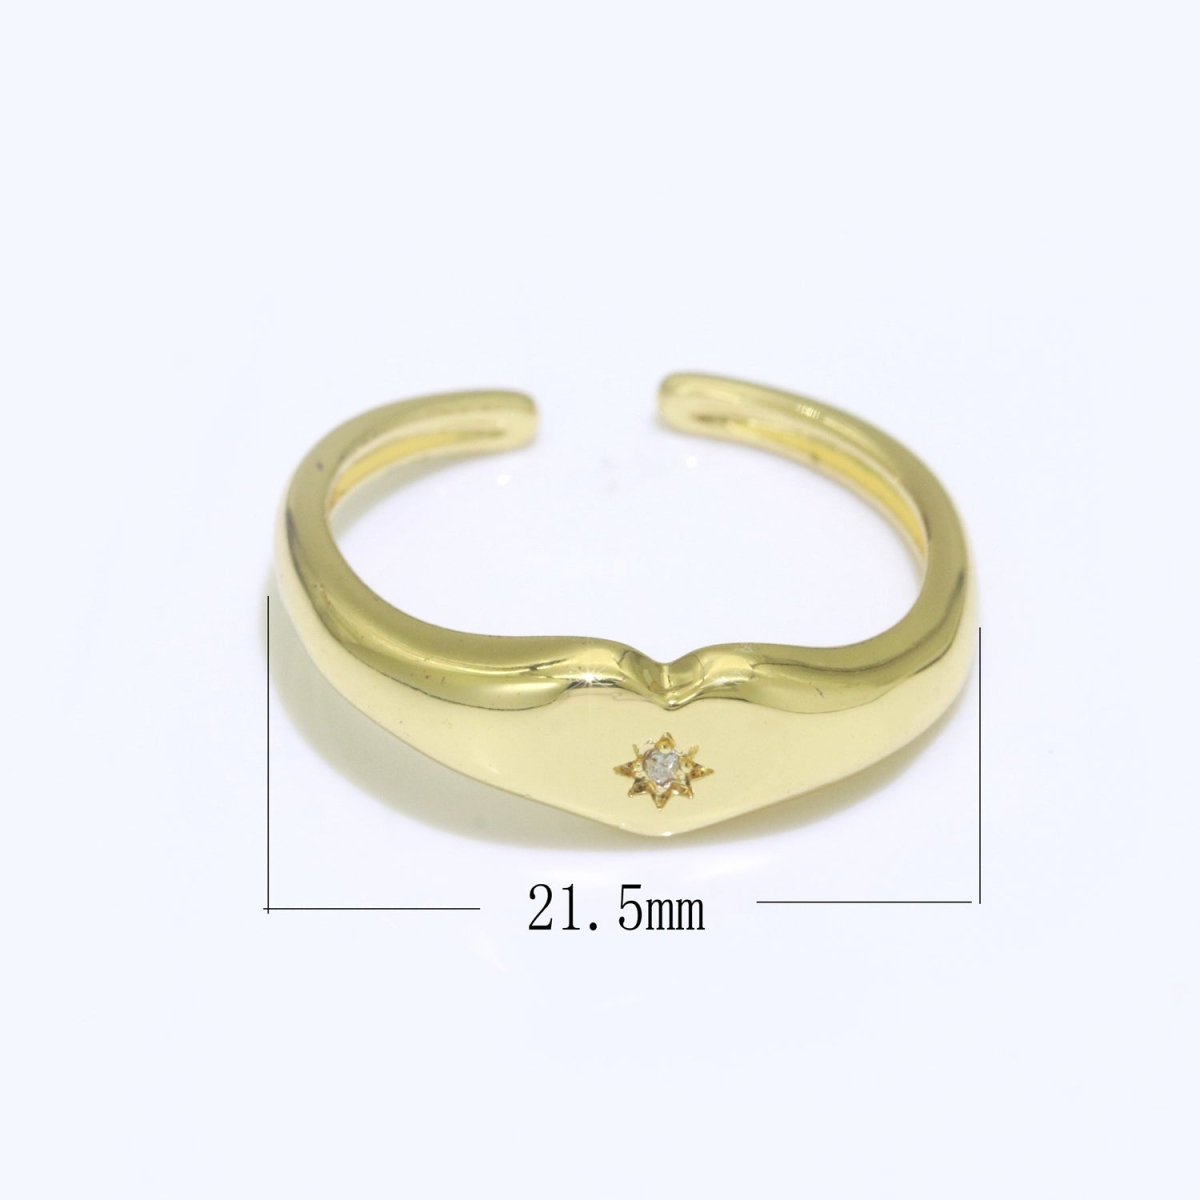 Gold Heart Signet Ring Open Adjustable Ring CZ Polaris Star burst Stackable Chunky Bold Celestial Ring Jewelry Gift, S-109 - DLUXCA